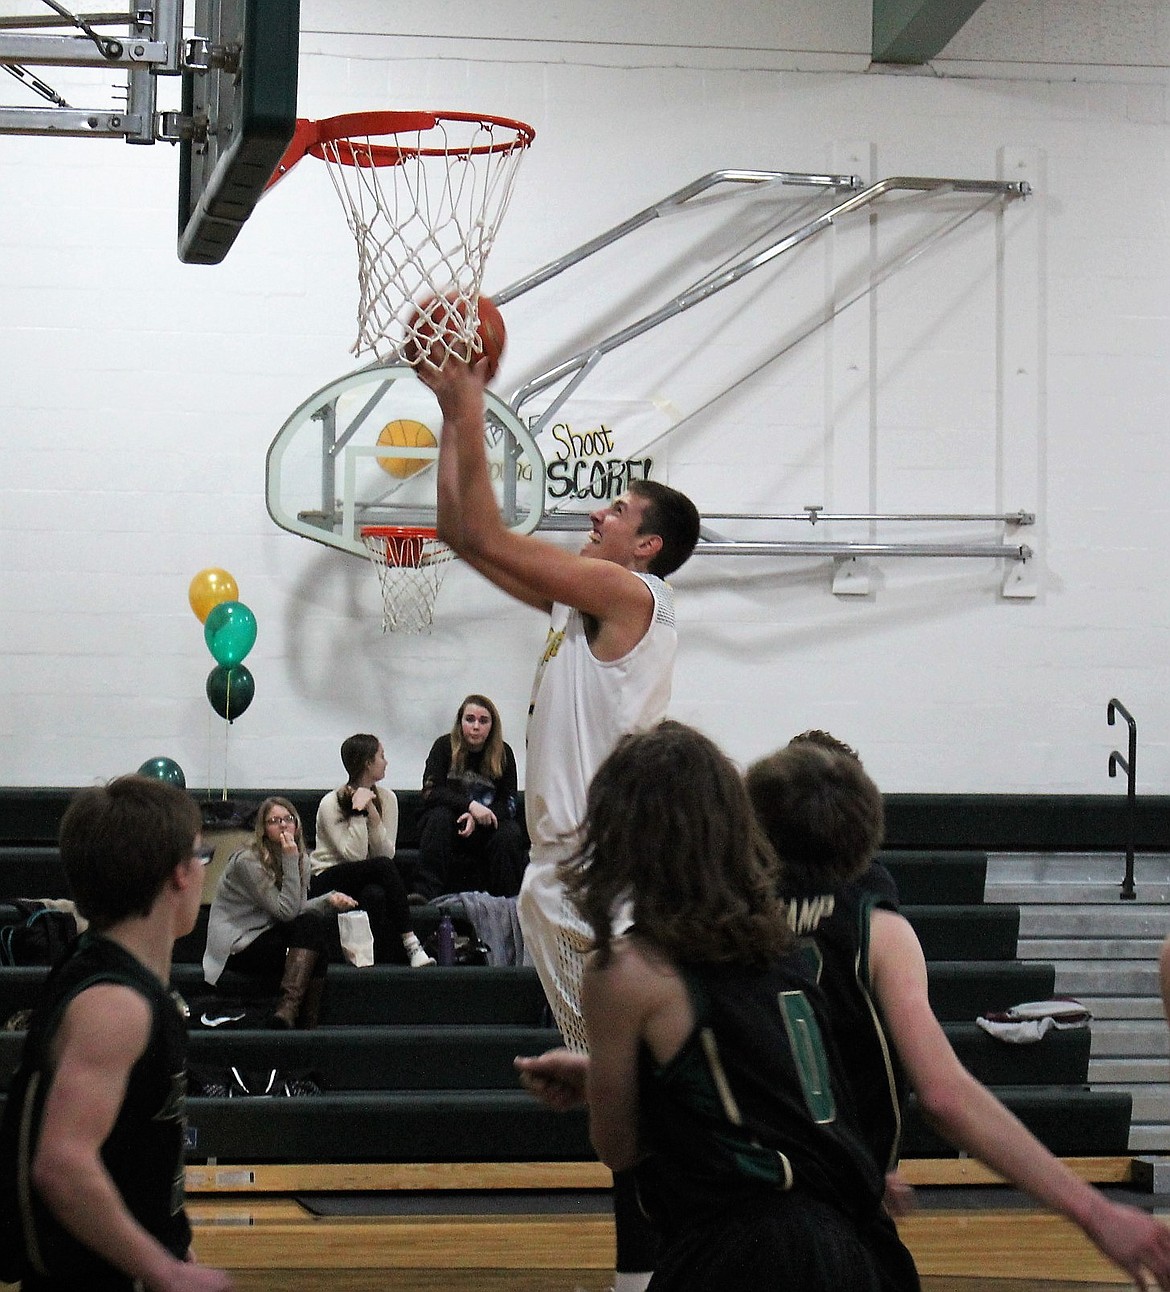 Senior JD Booker hits a shot during his final home game last Saturday in St. Regis against the Lincoln Lynx. The Tigers won, 66-24. (Kathleen Woodford/Mineral Independent)